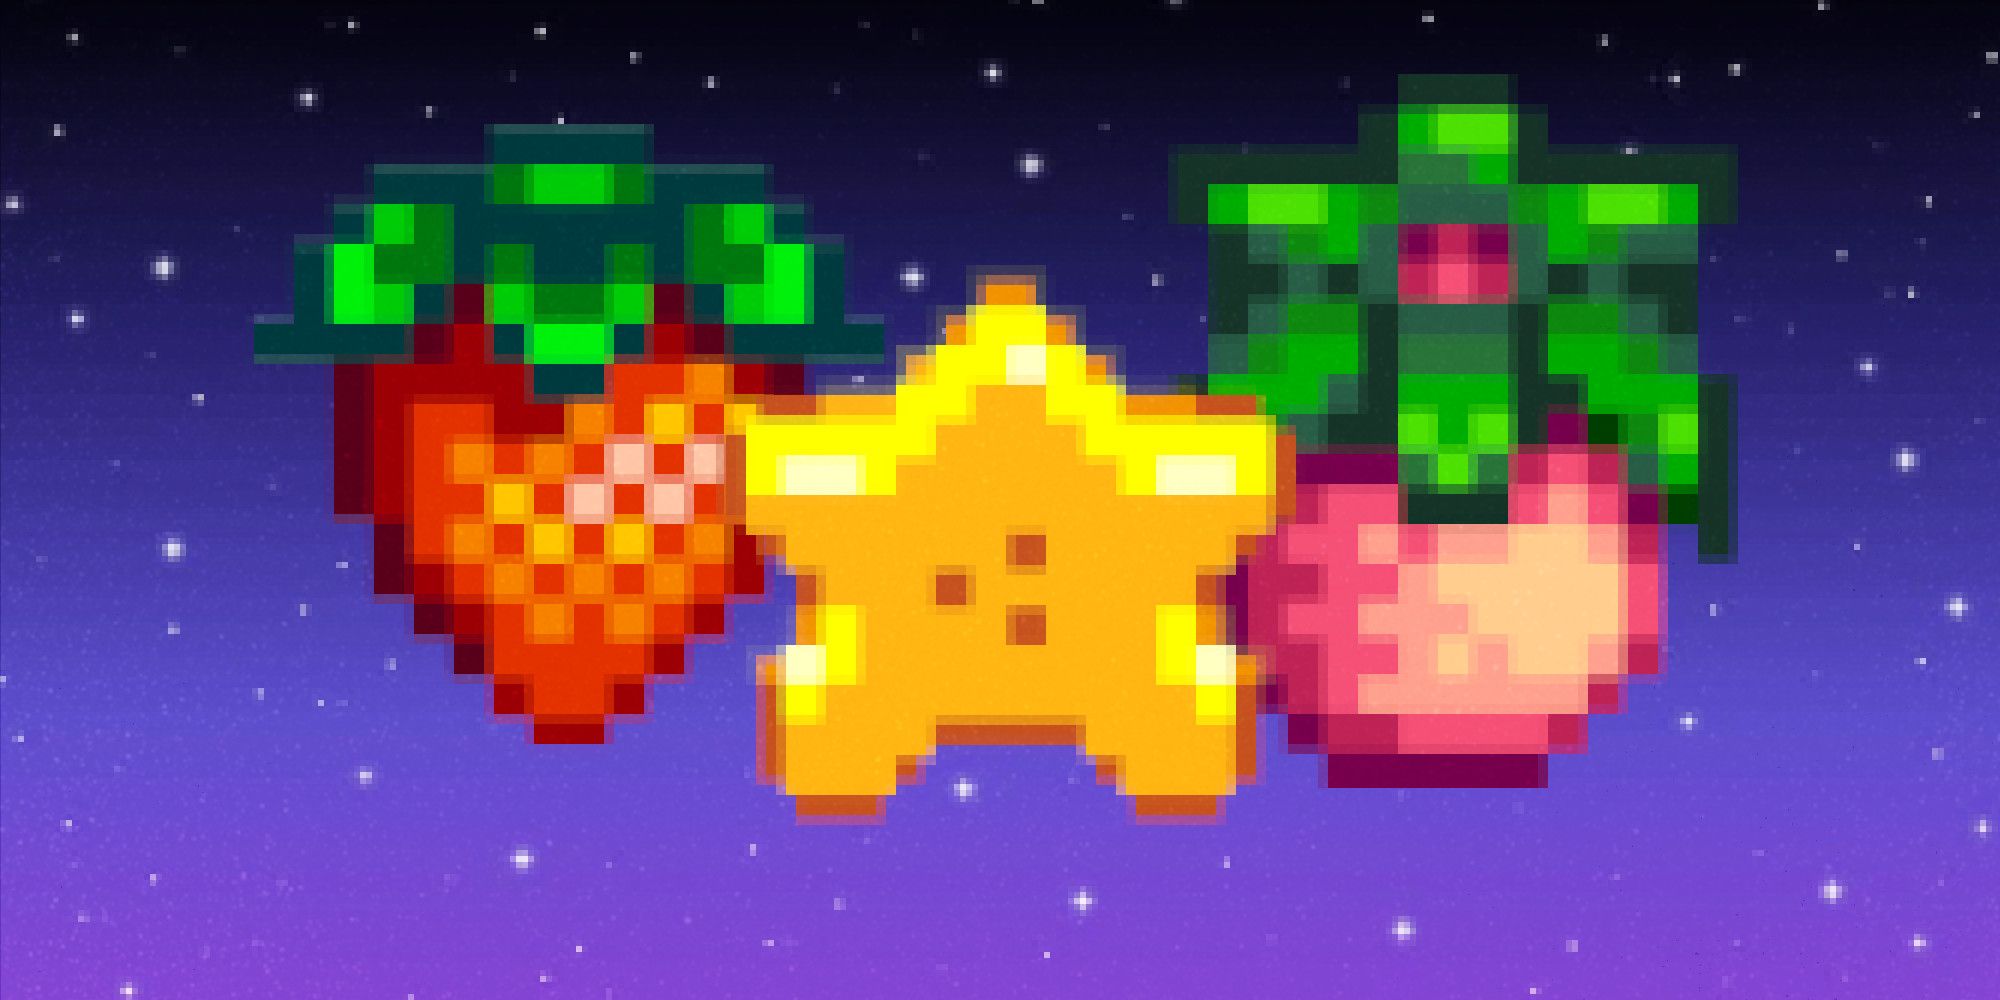 Three fruits–strawberry, star fruit, and a melon–from Stardew Valley in front of a pixel night sky backdrop